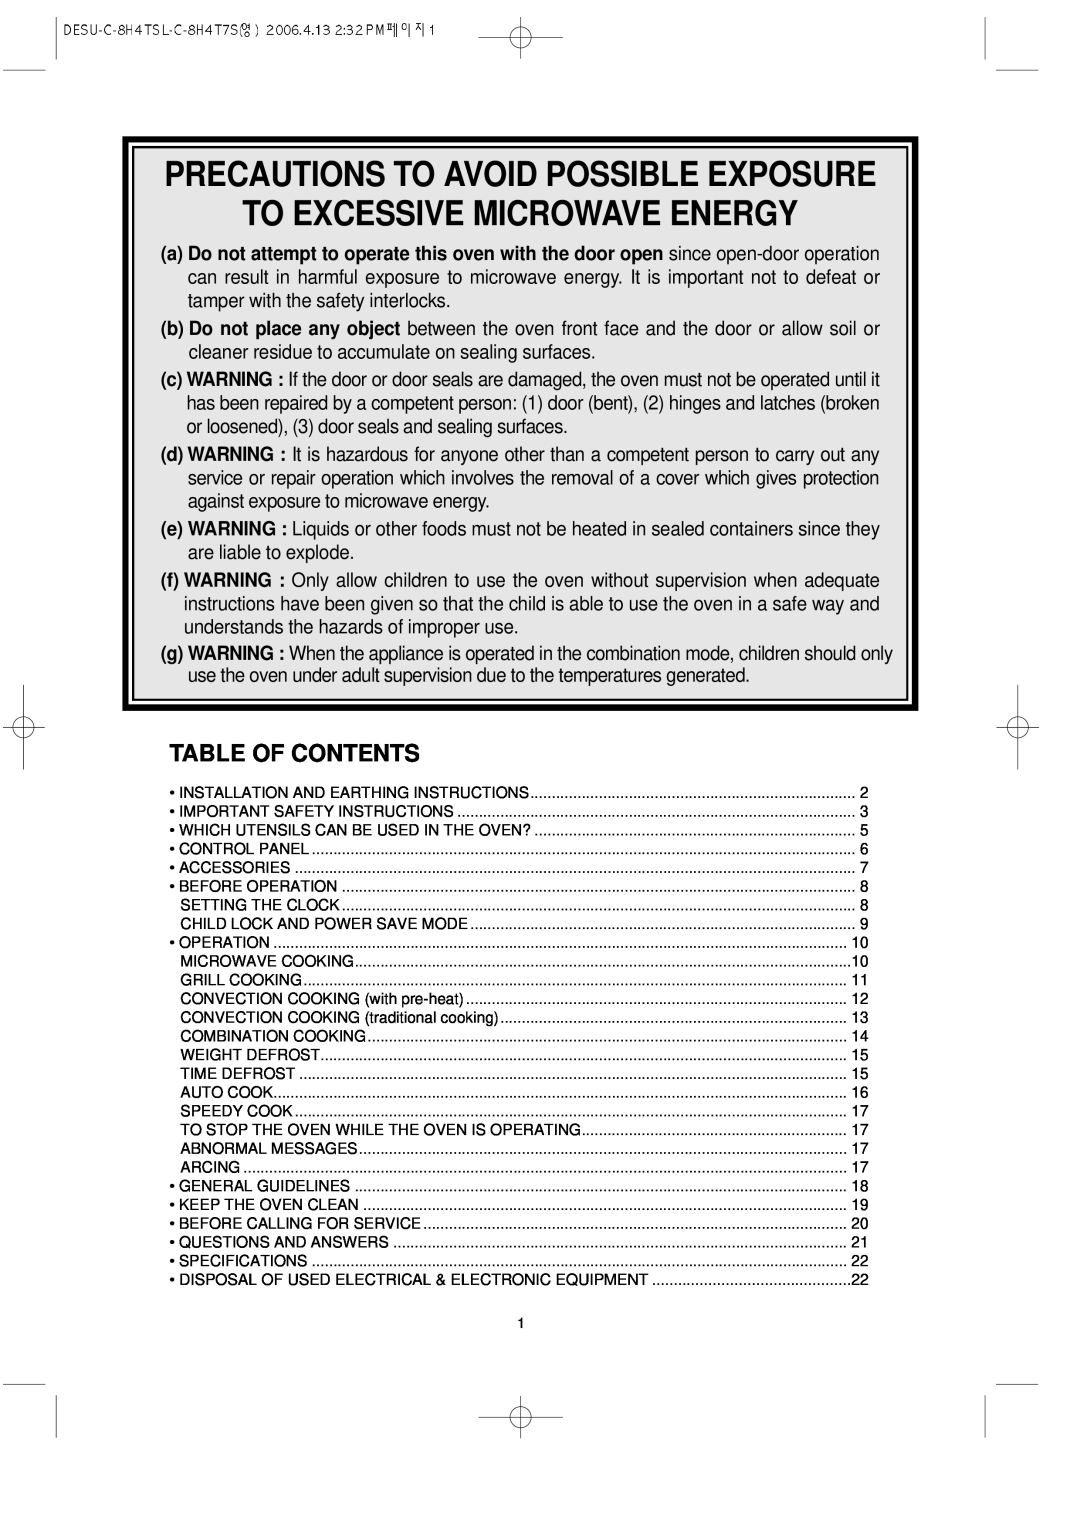 Daewoo KOC-8H4TSL owner manual Precautions To Avoid Possible Exposure To Excessive Microwave Energy, Table Of Contents 